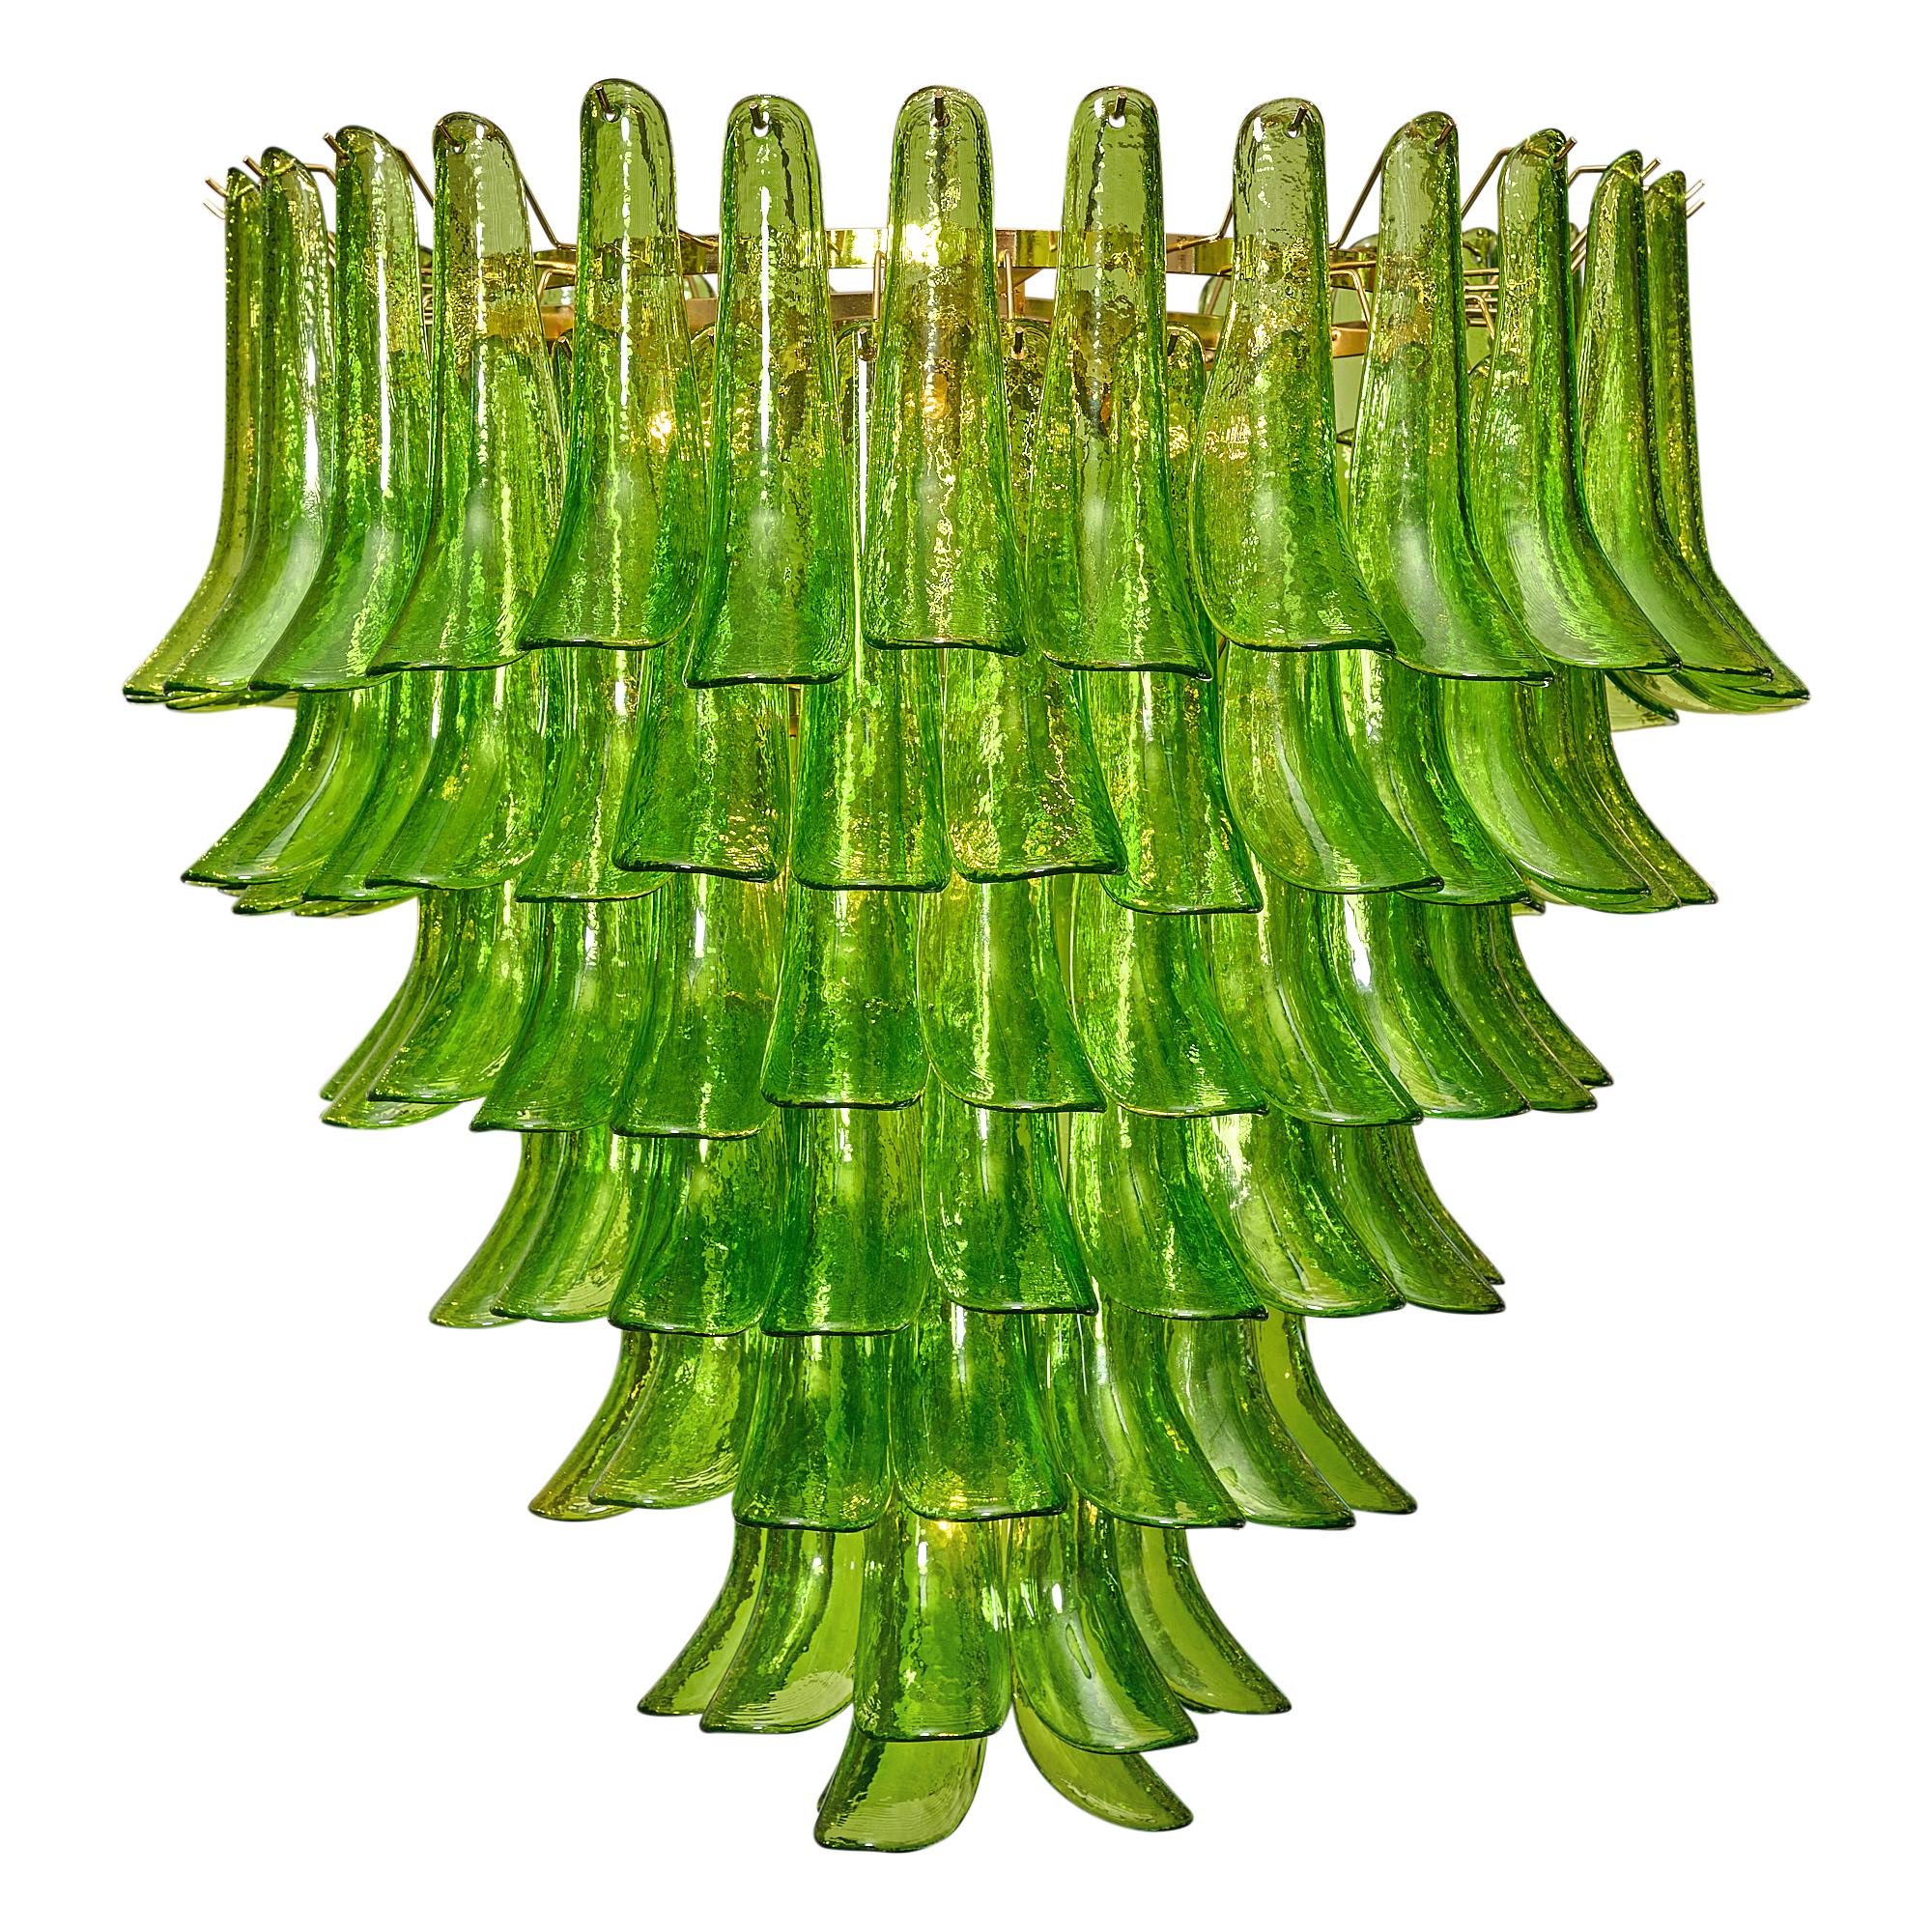 Green Murano glass “Selle” chandelier with stunning pieces overlapping to create a feathered effect. This stunning work of art; from the artisans in Murano, Italy, created this piece out of green glass with hand-blown techniques through each piece.